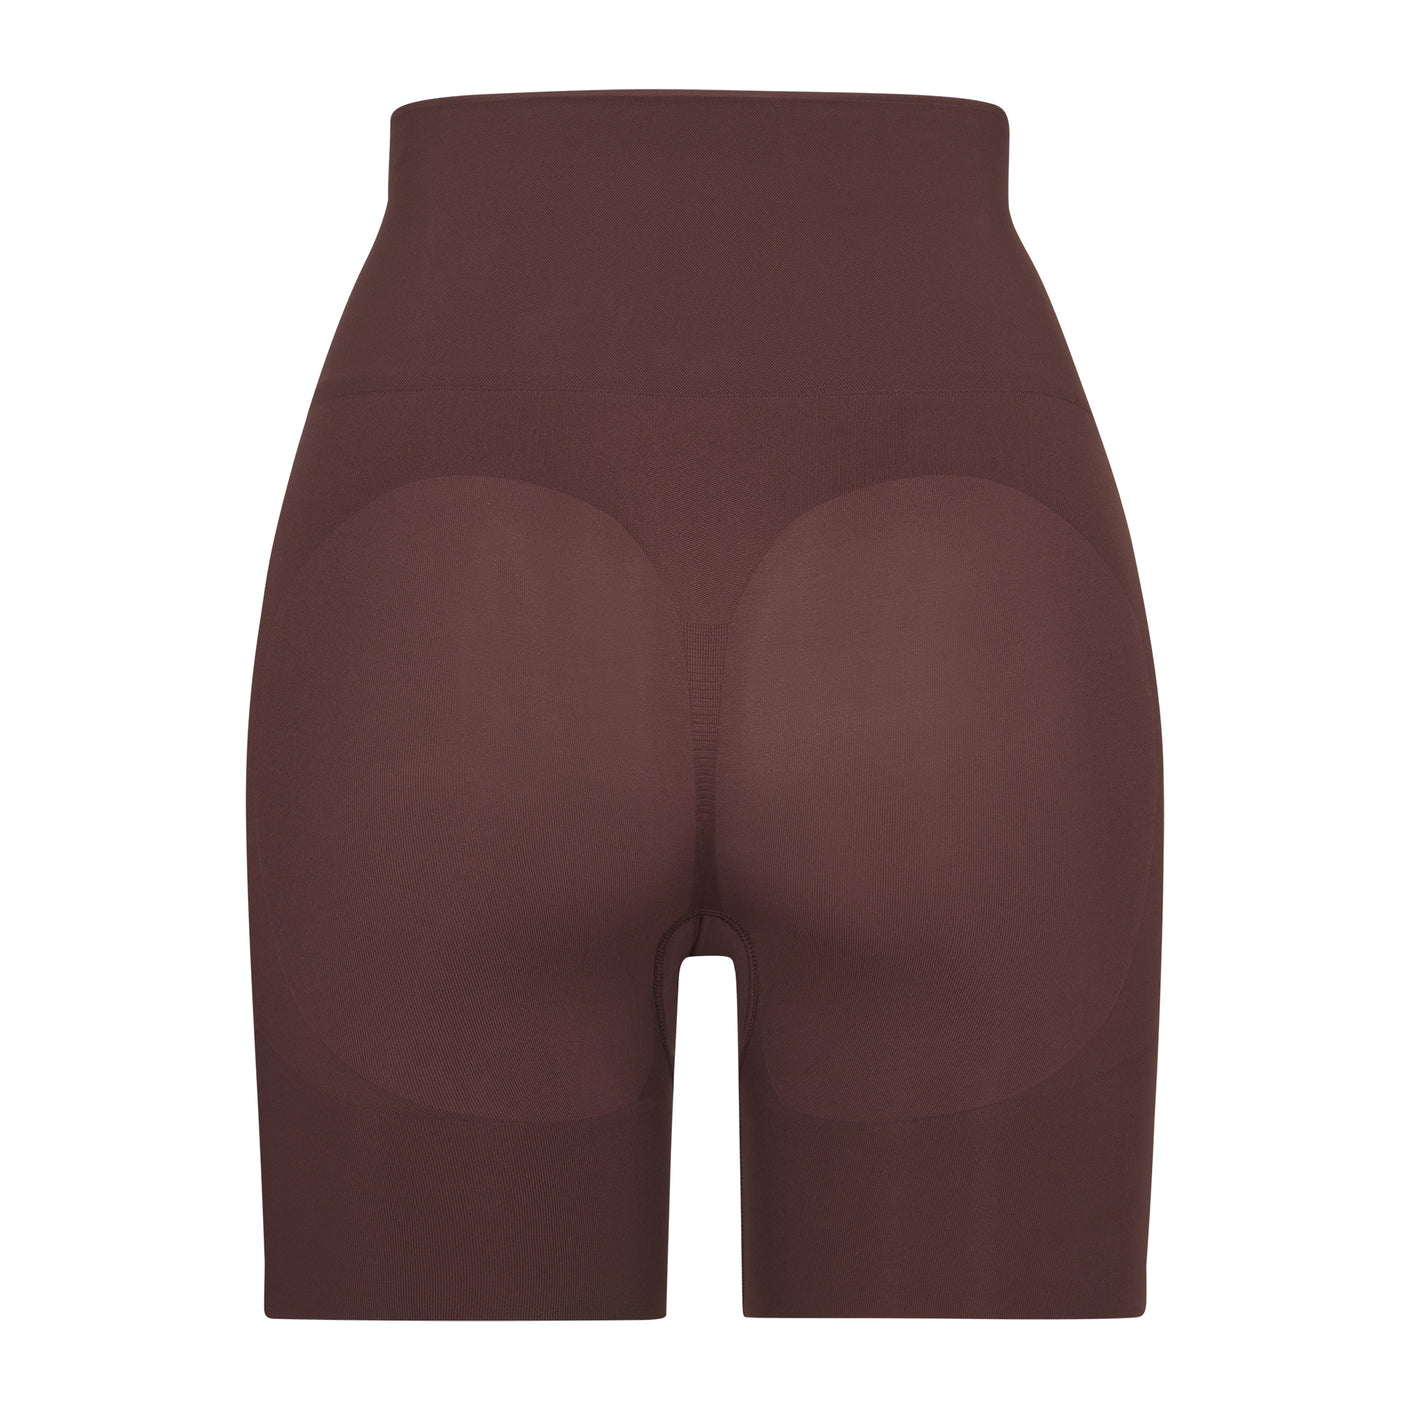 Your butt will never look better. Our Butt-Enhancing Shapewear features  multiple compression levels and large butt pockets that snatch an